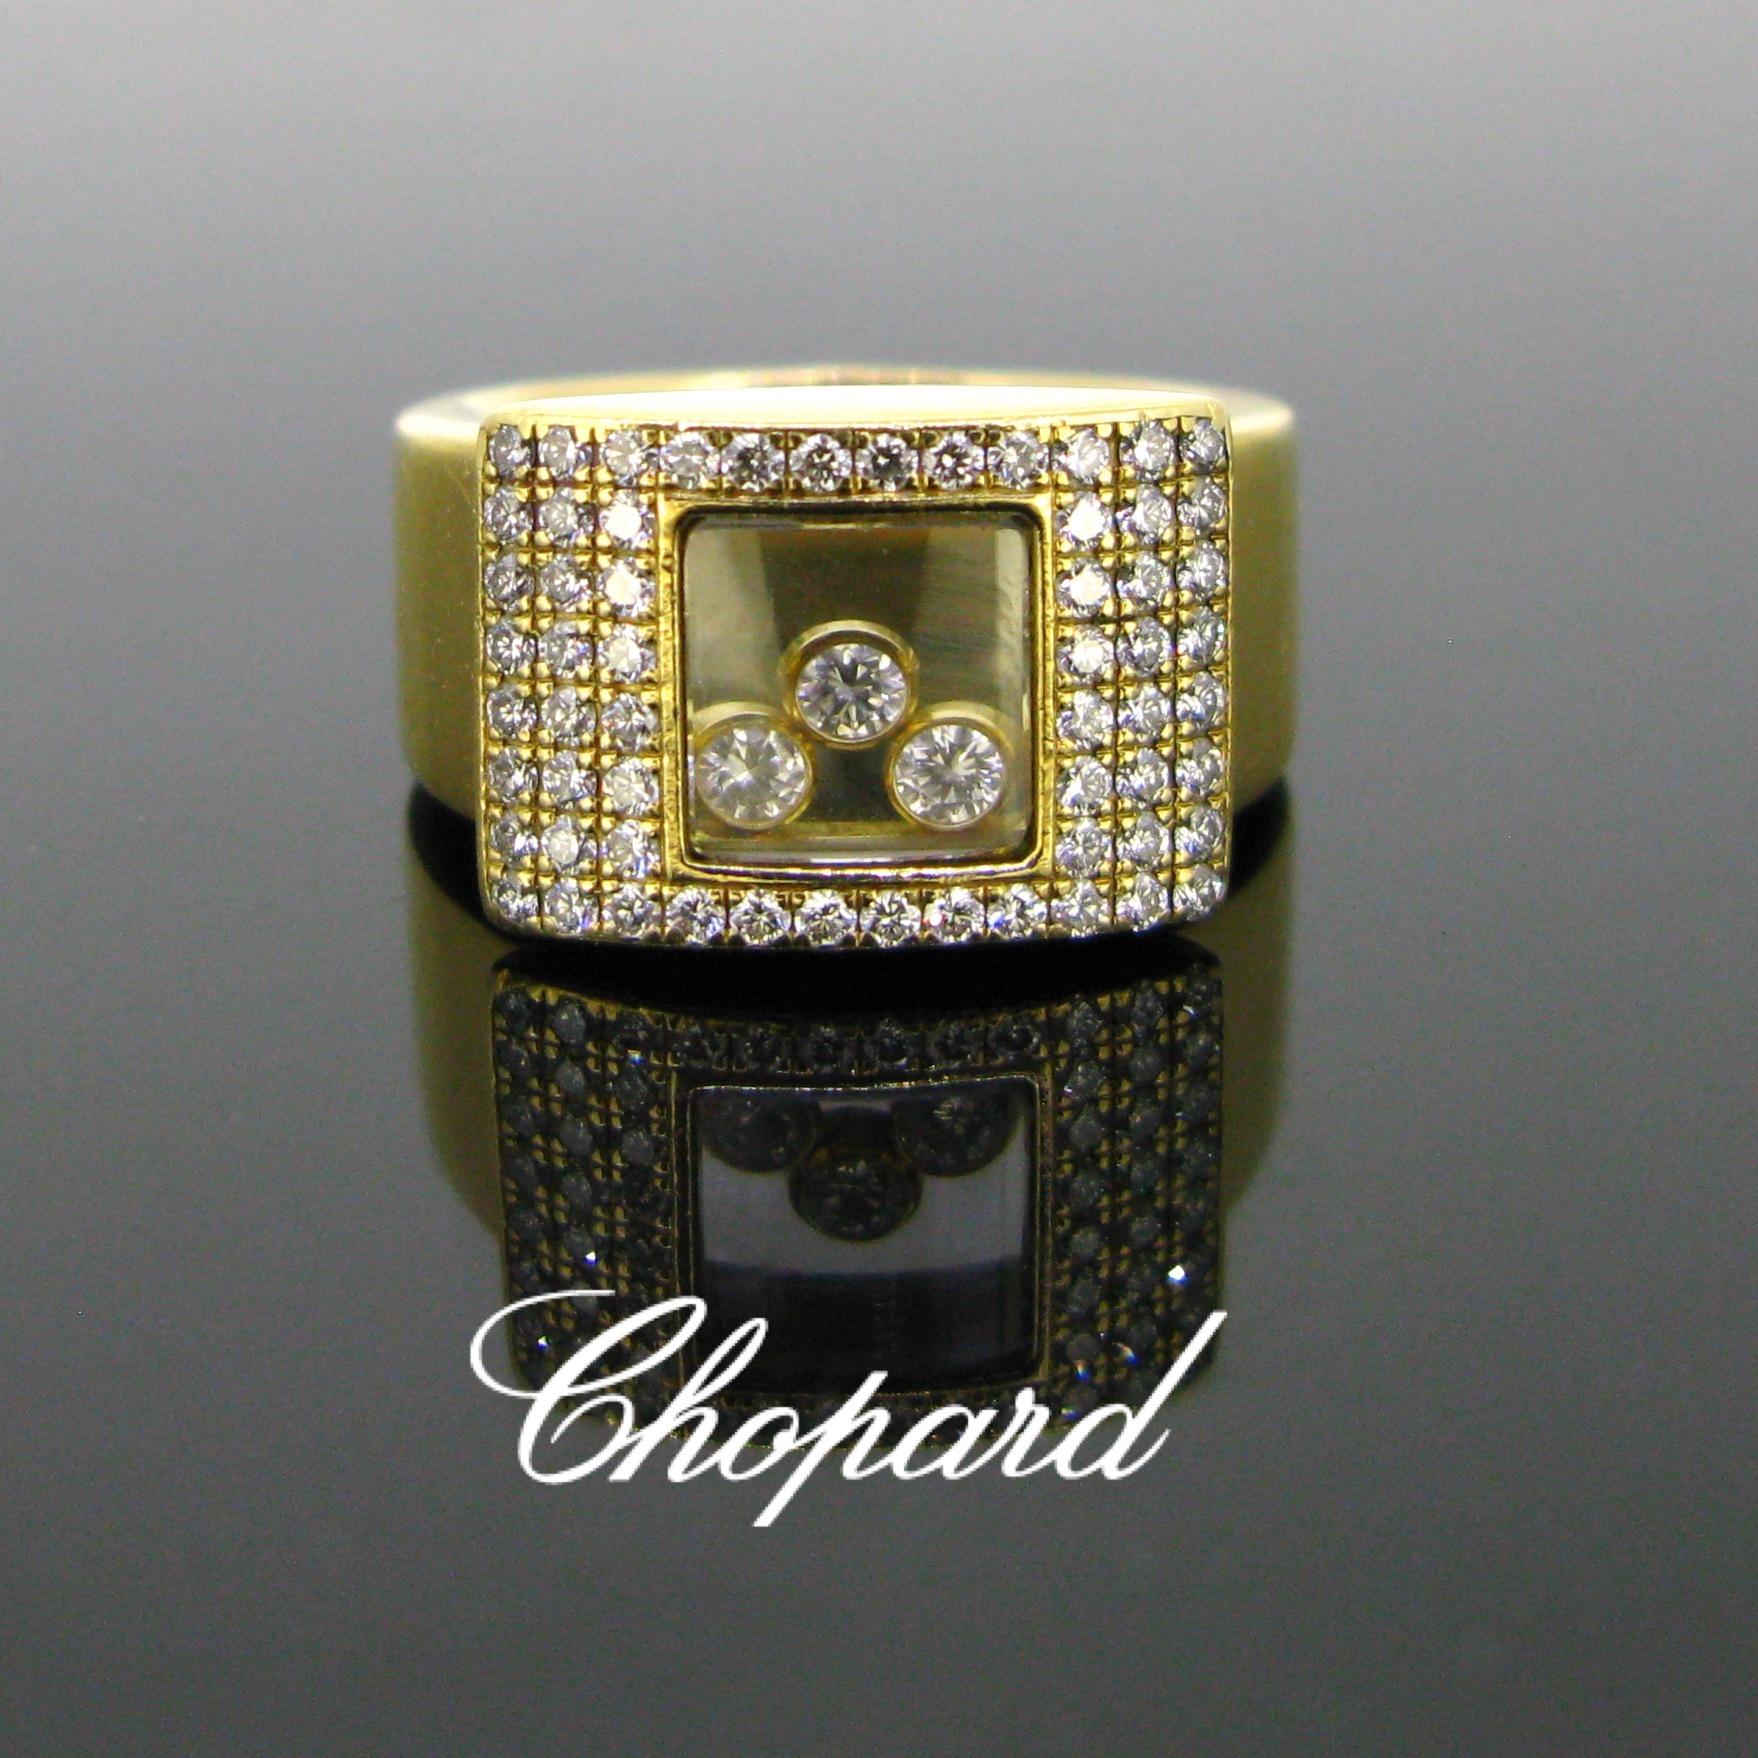 chopard for ever ring price